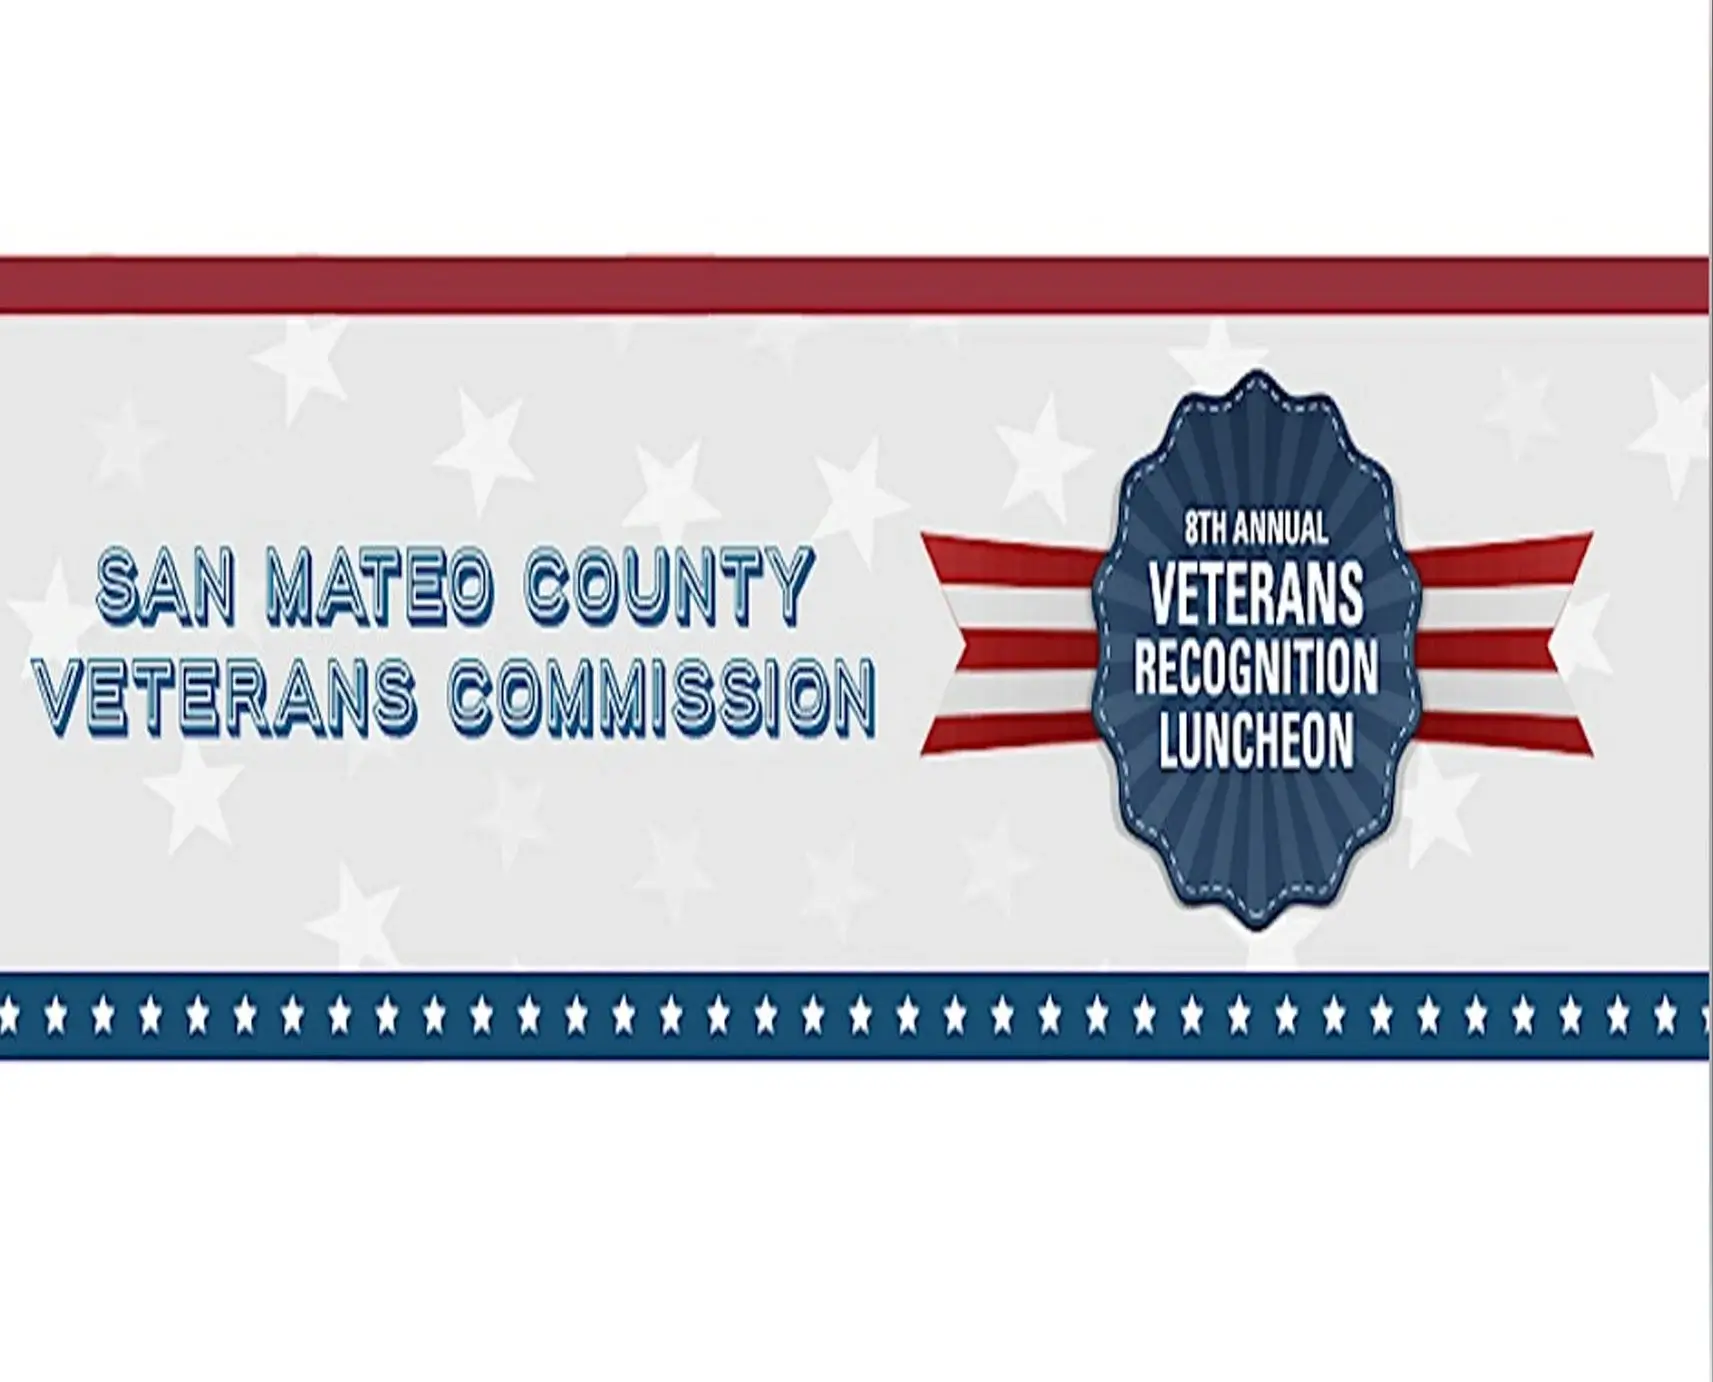 San Mateo County Veterans Commission 8th Annual Veterans Luncheon